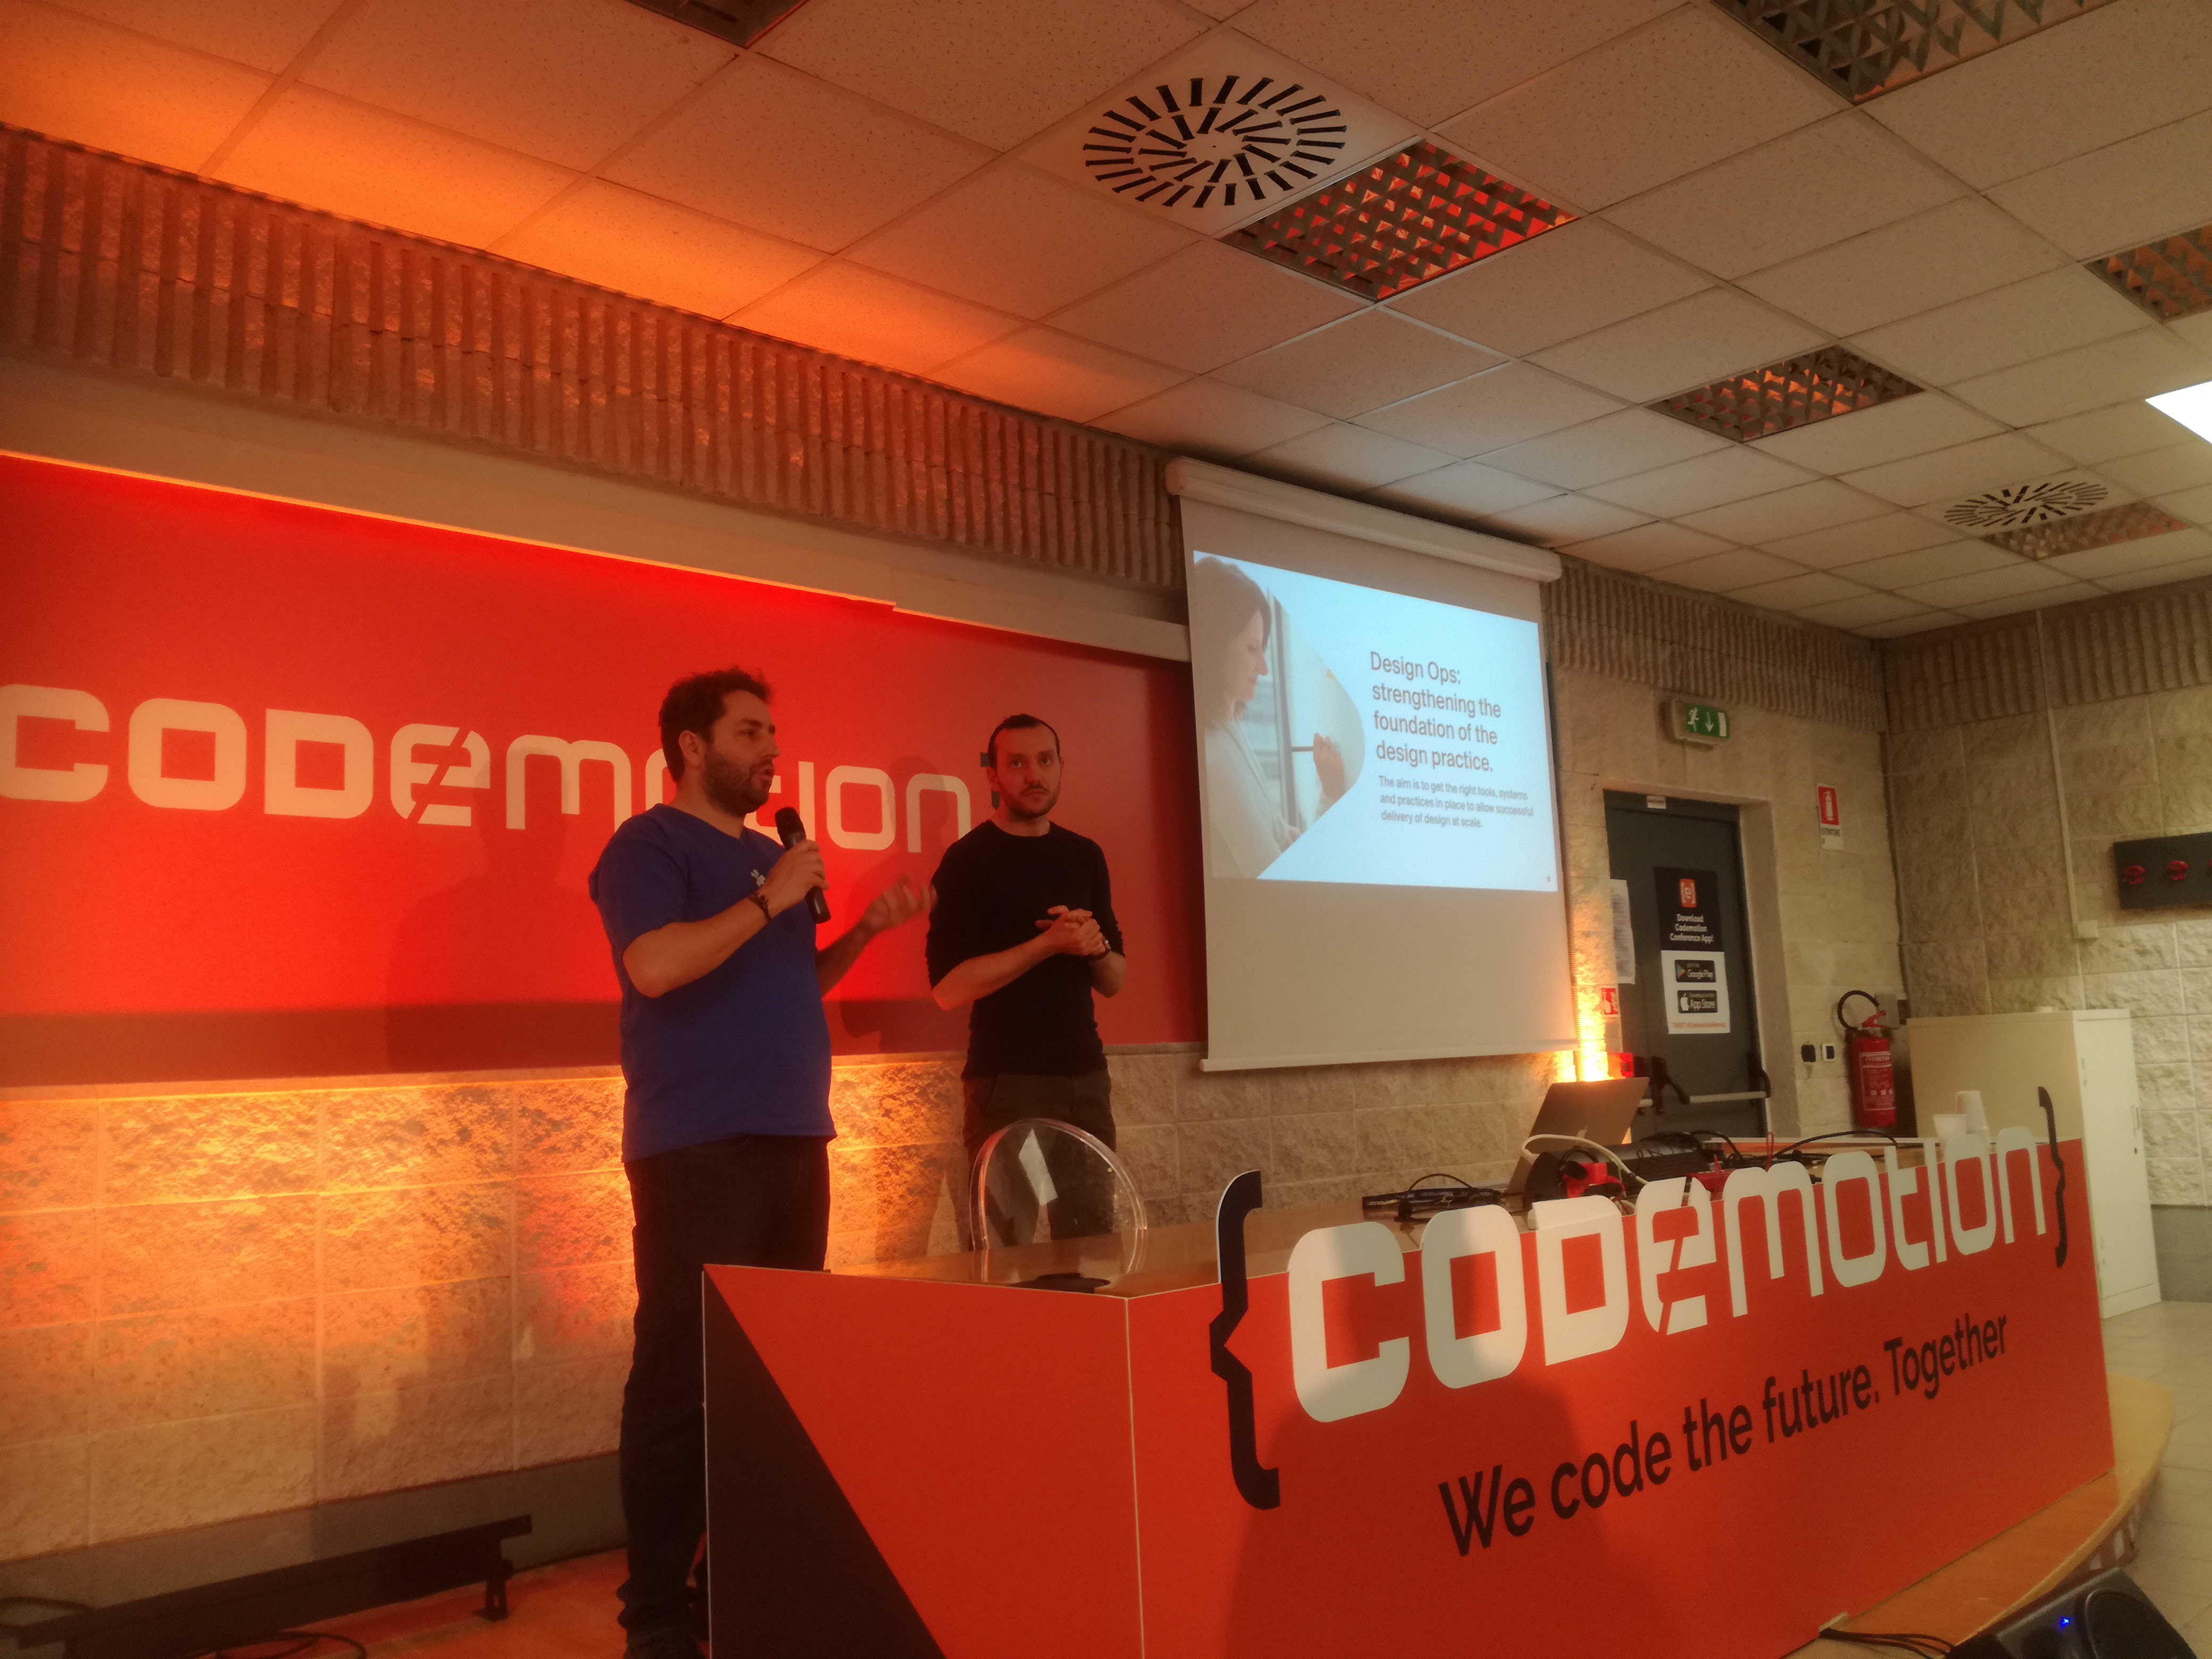 Luca Mascaro (left) and Matteo Petrani (right) during their talk at Codemotion Rome 2019